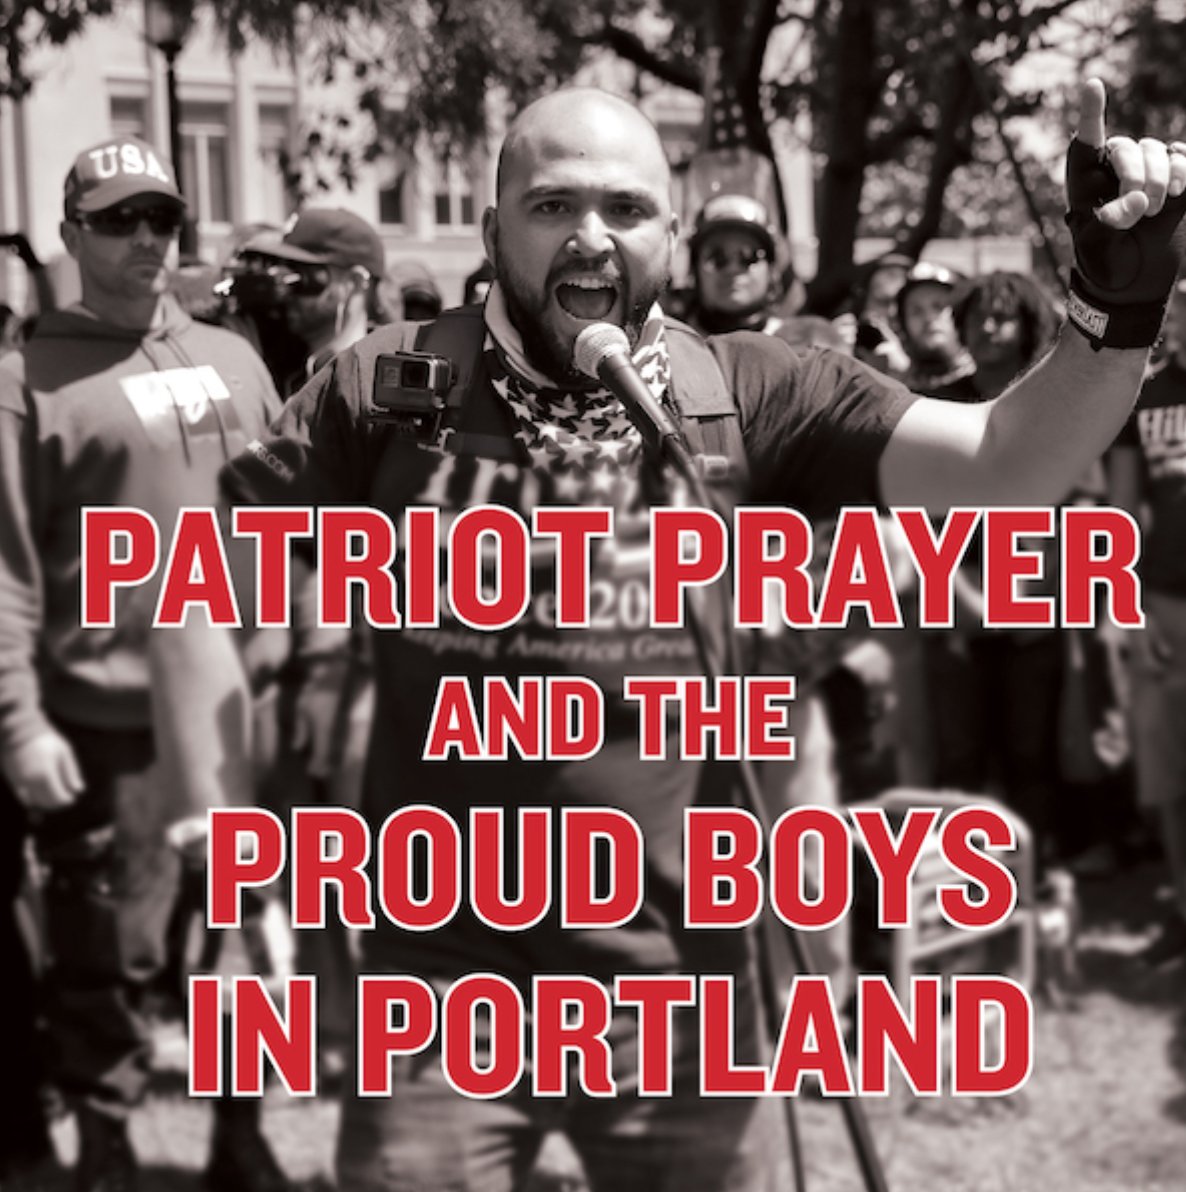 Speaking of Patriot Prayer & the Proud Boy's close relationship, here is Gavin's reaction to a joint Proud Boy & Patriot Prayer rally that was formed expressly to do violence, back in 2018. https://twitter.com/itsmikebivins/status/1003810296257921024 https://www.splcenter.org/hatewatch/2018/06/06/patriot-prayer-and-proud-boys-roll-portland-ready-fight